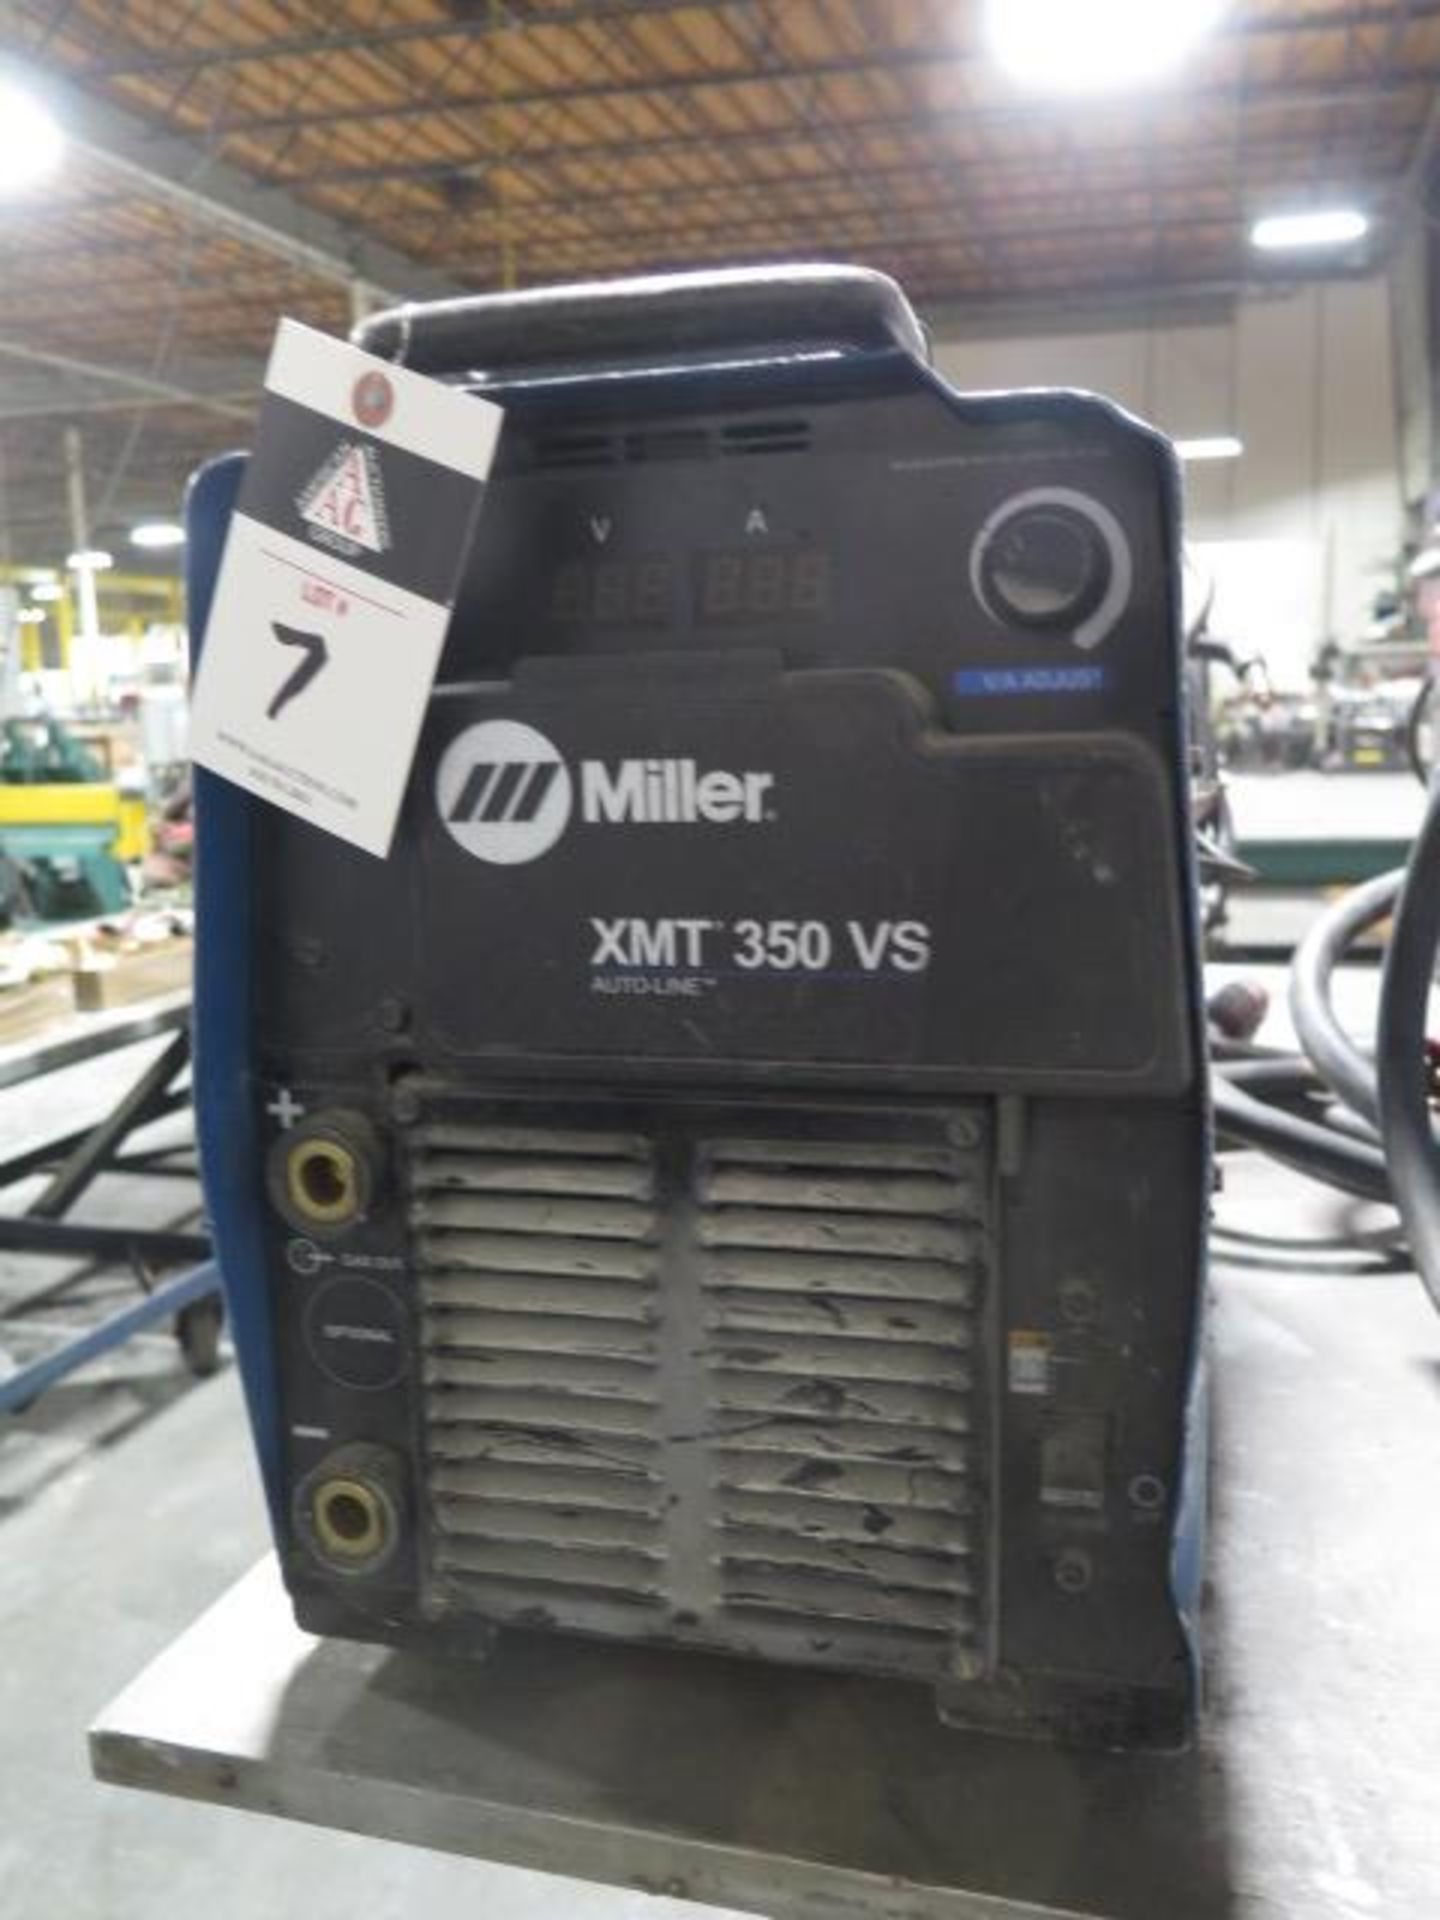 Miller XMT 350 VS Auto-Line Arc welding Power Source s/n MG024114U (SOLD AS-IS - NO WARRANTY) - Image 3 of 5